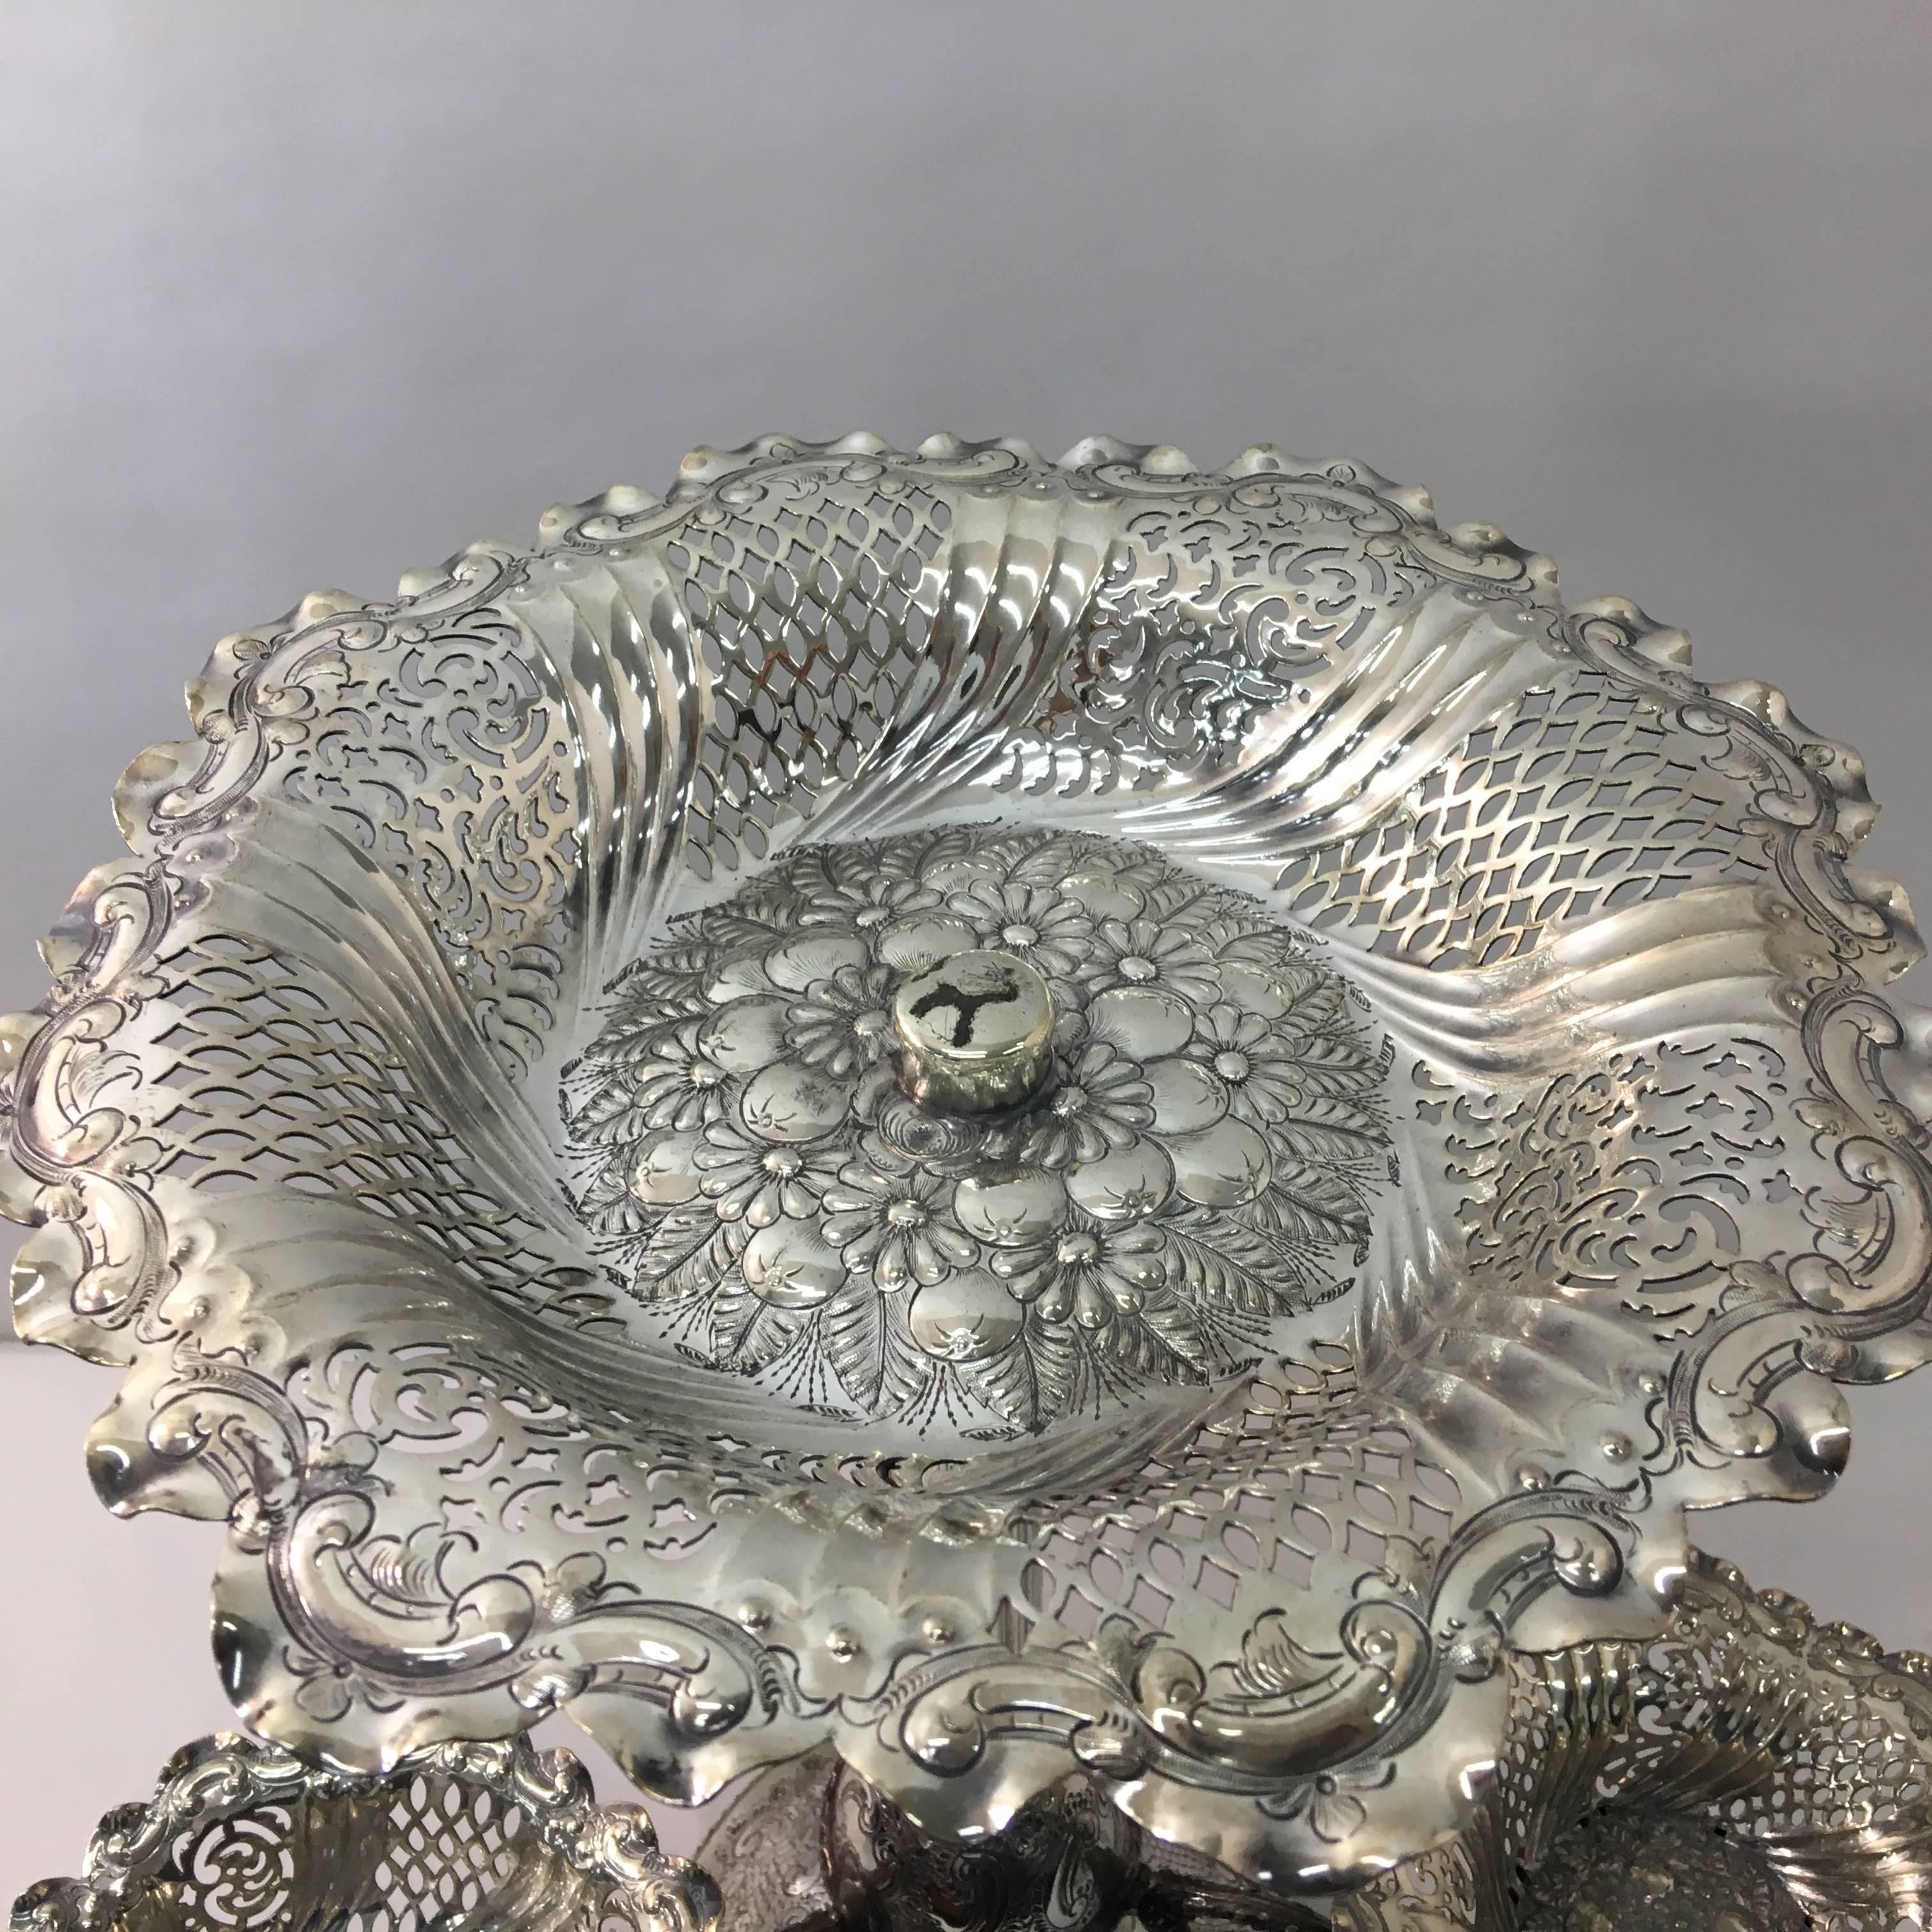 Silver plated Epergne in good original conditions and patina by Mappin & Webb.